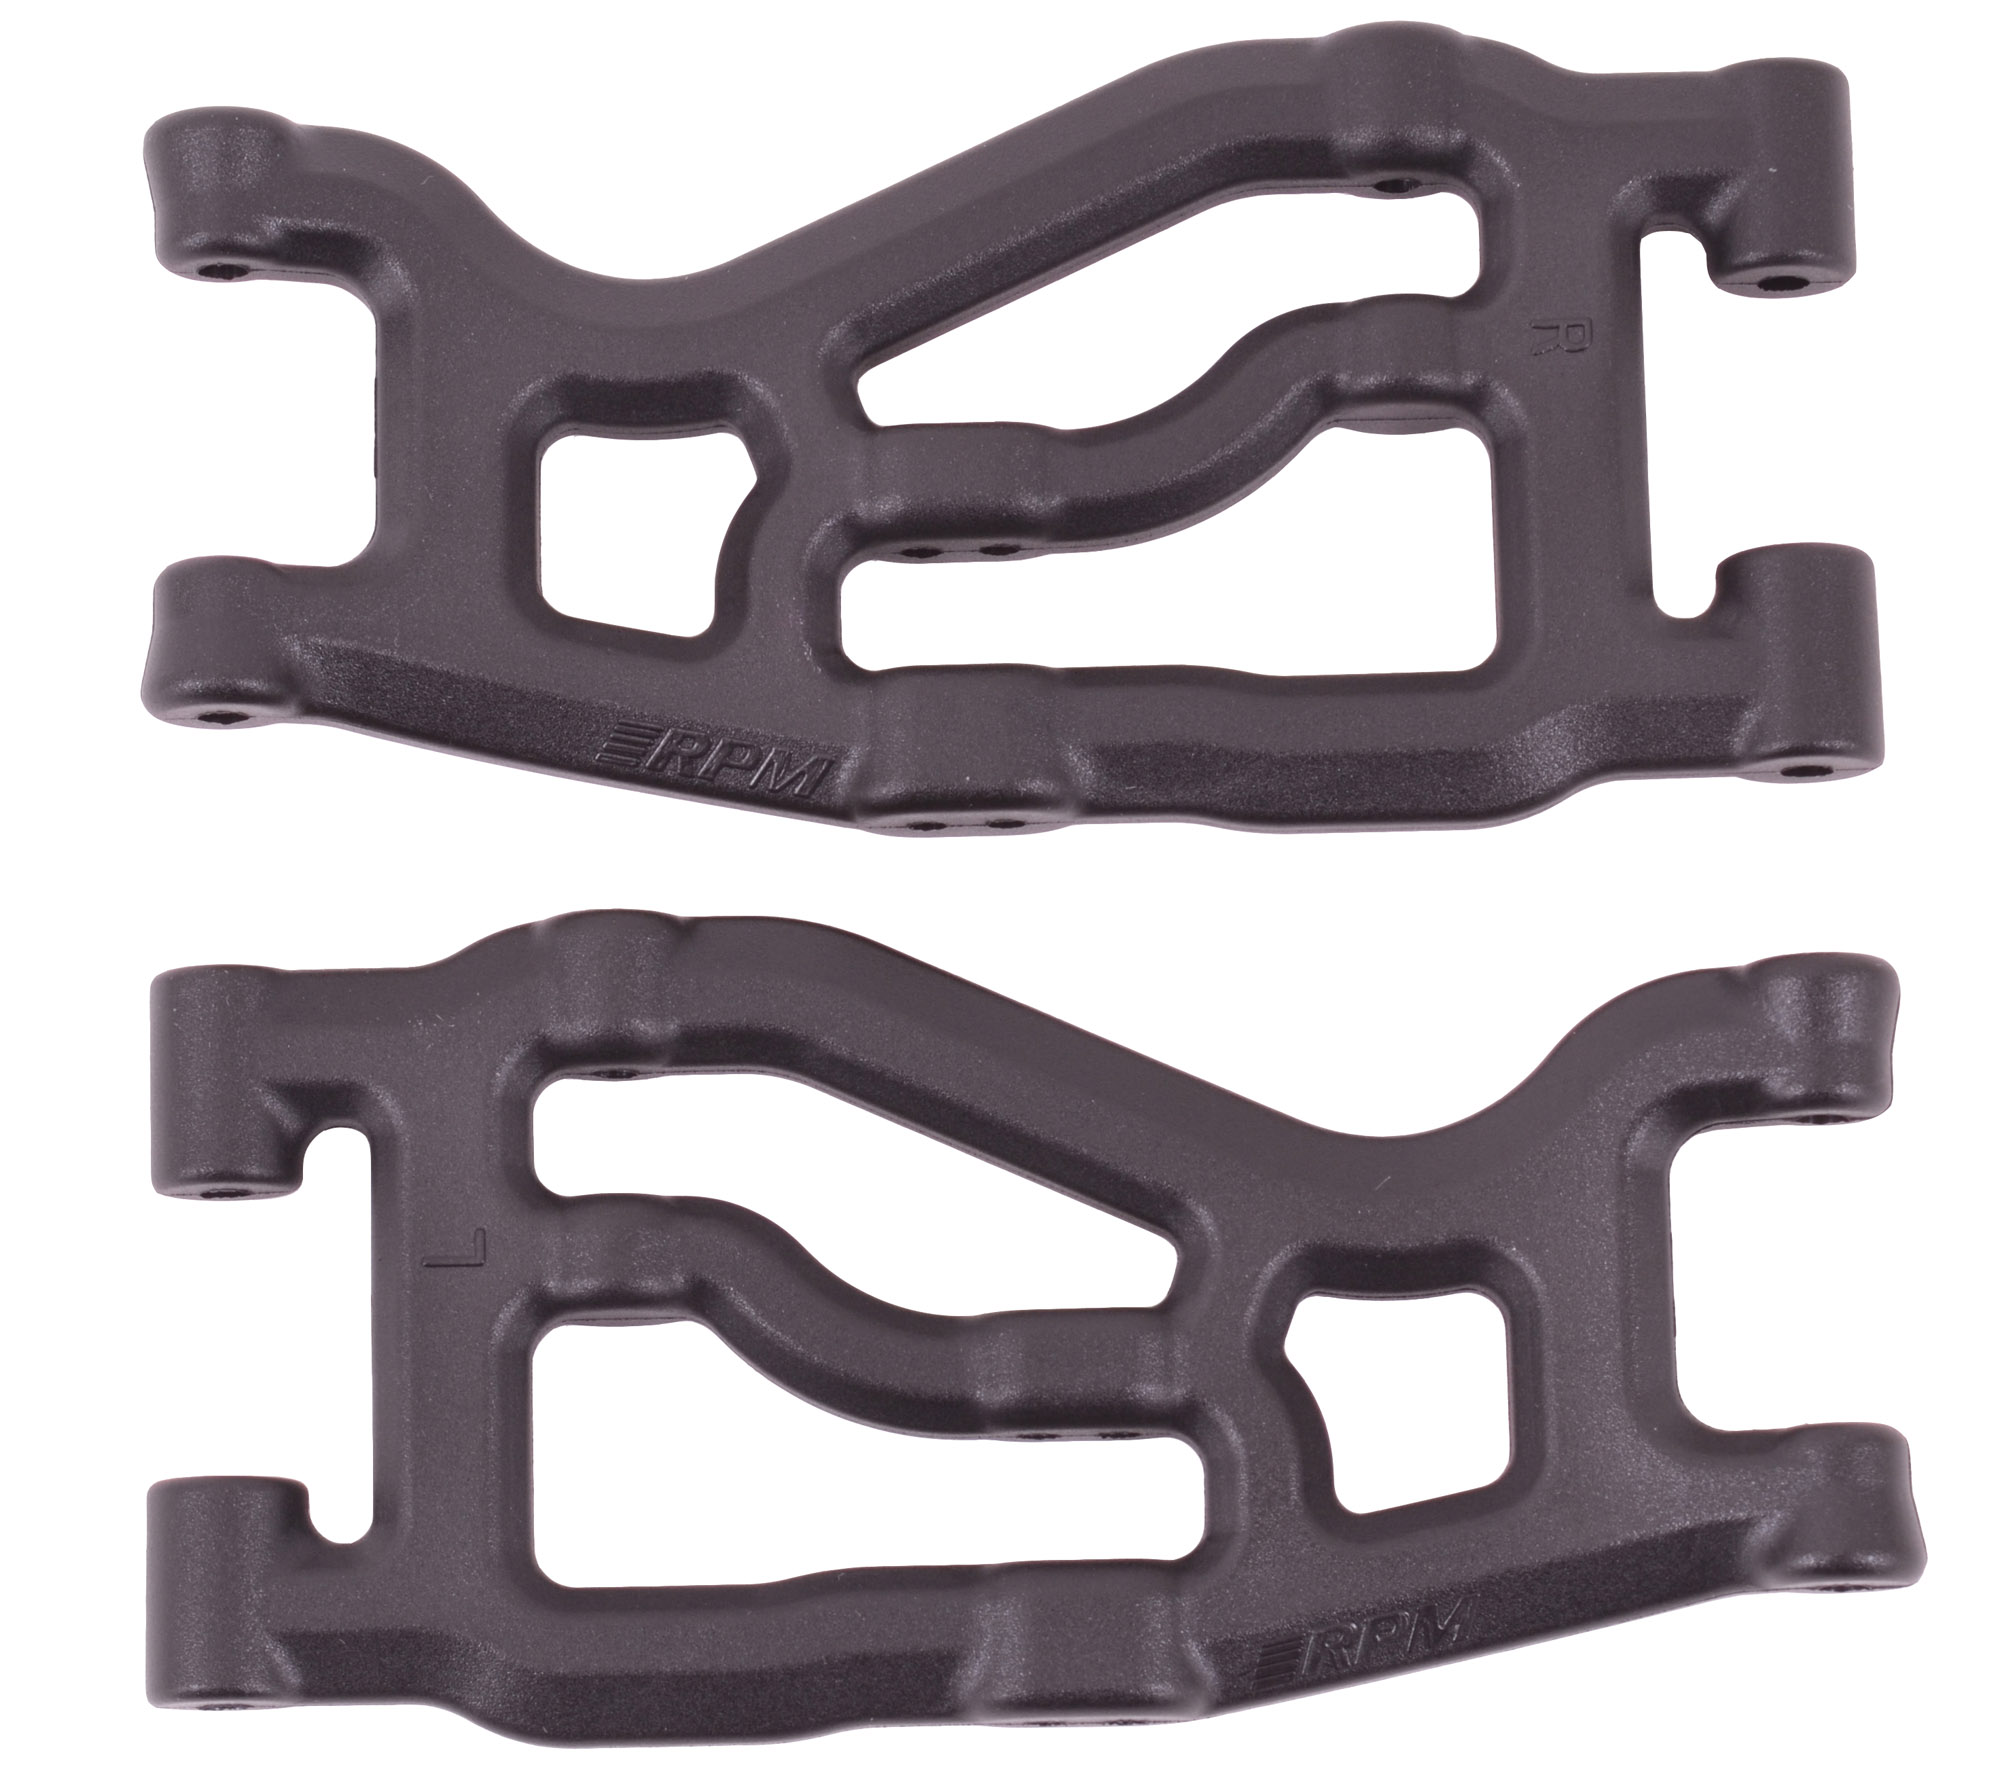 Axial Yeti Metal Aluminum Lower Front Control Arms Replacement